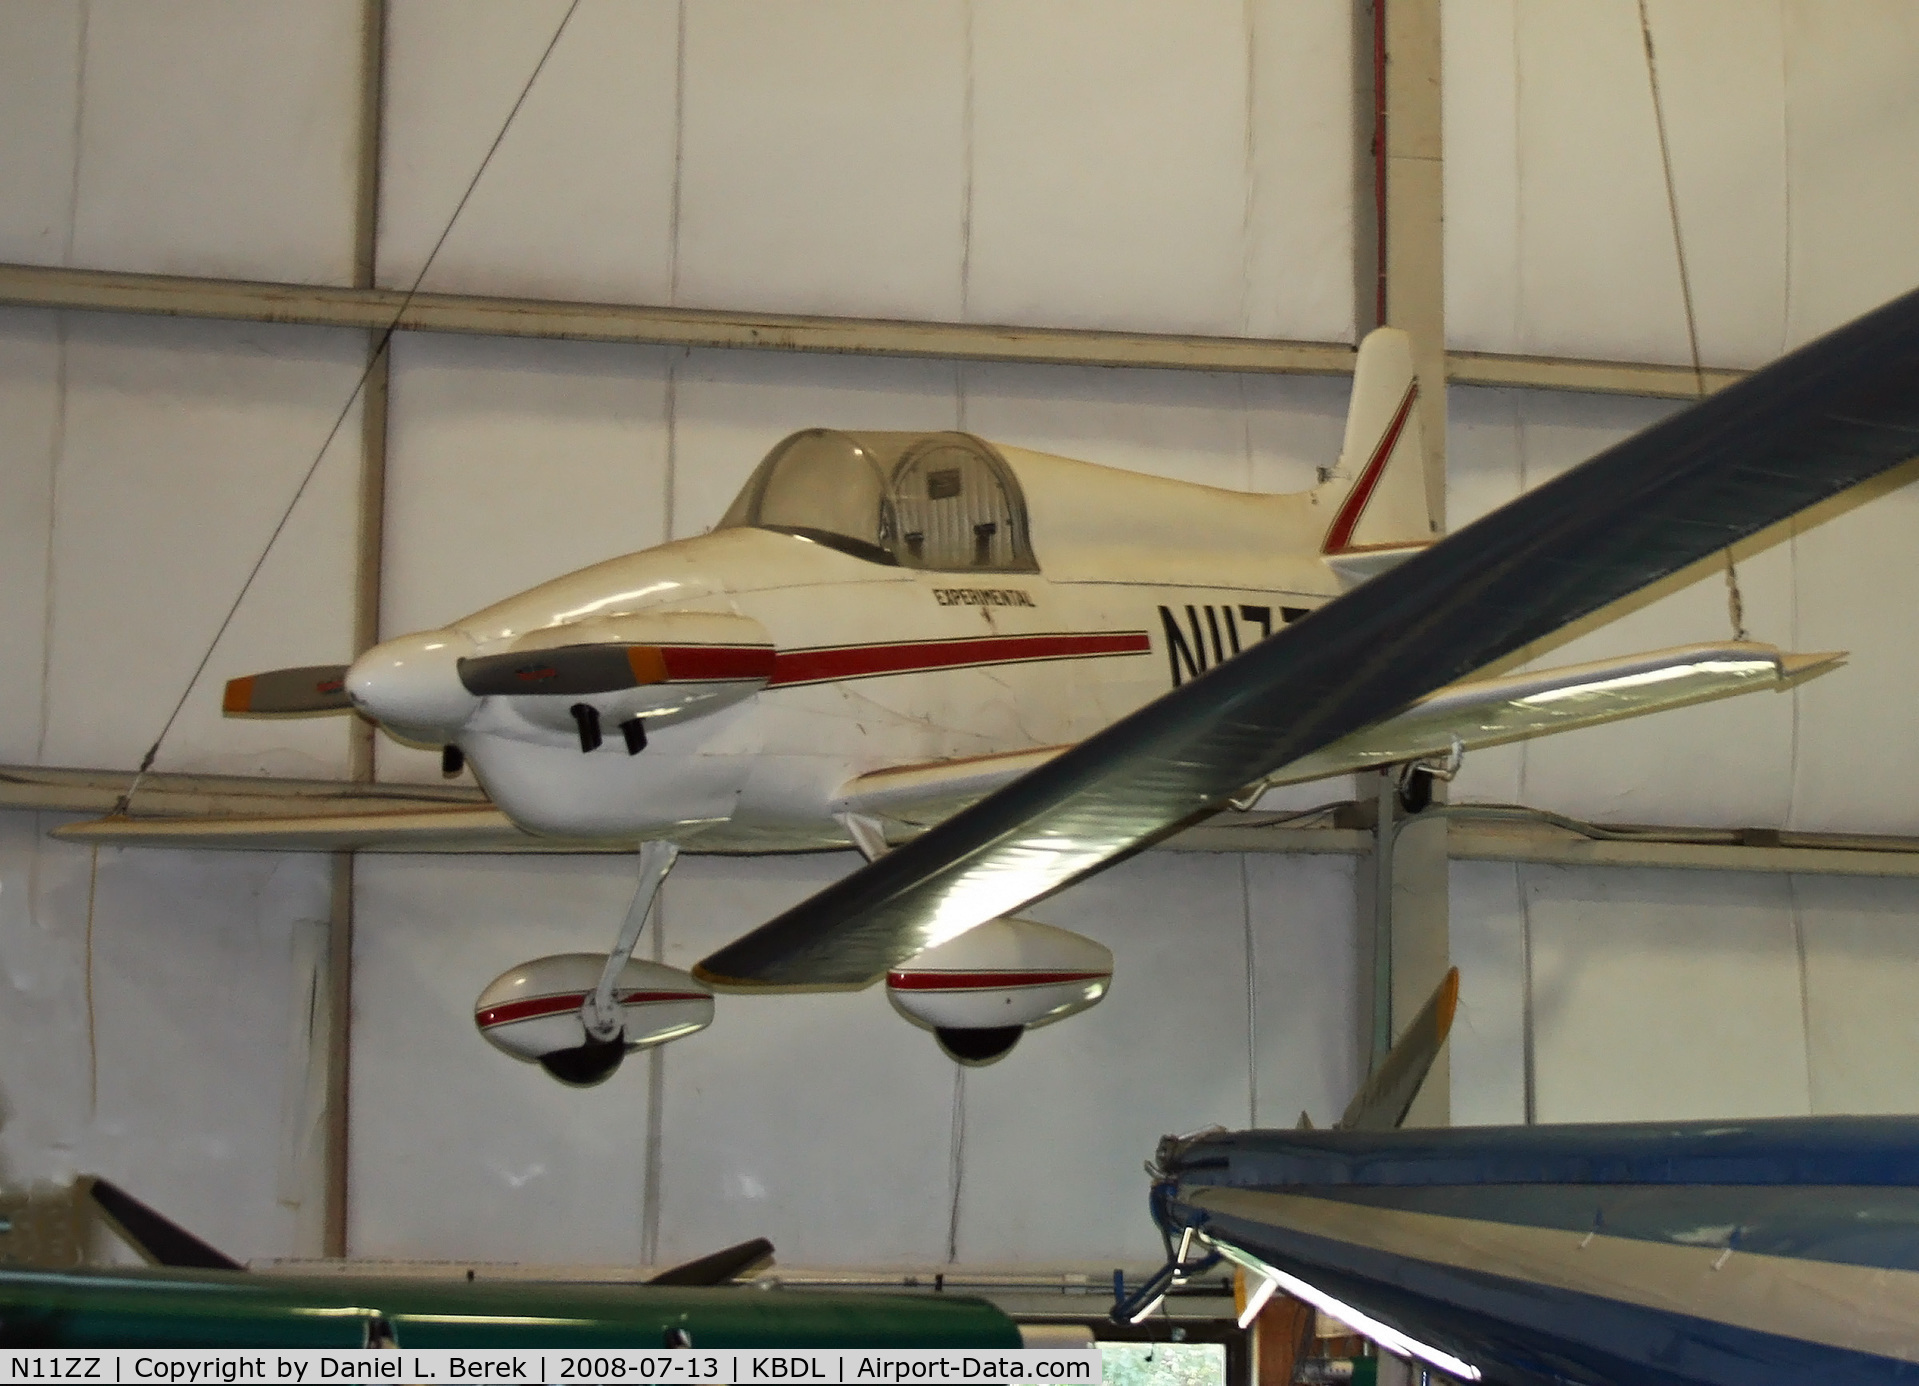 N11ZZ, 1970 Nicks Special LR-1A C/N 11, On display in the civilian aircraft wing of the NEAM